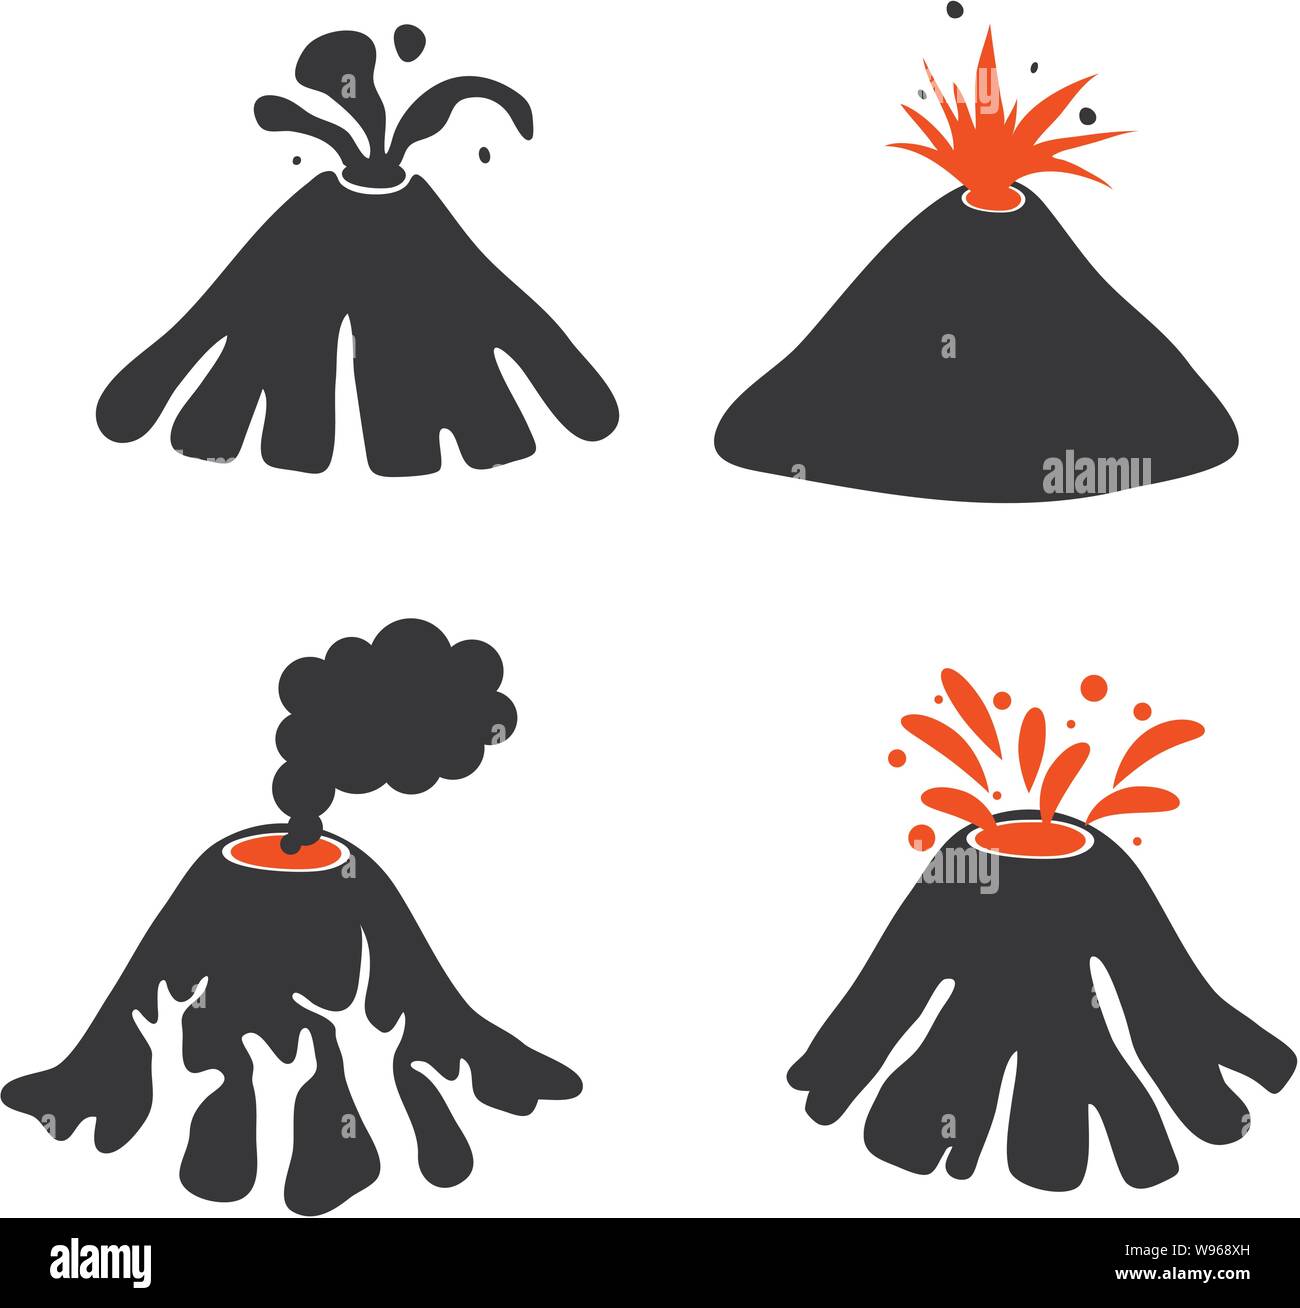 vector set of volcano icons isolated on white background. graphic logo of volcano eruption with mountain, lava and smoke for nature illustrations Stock Vector